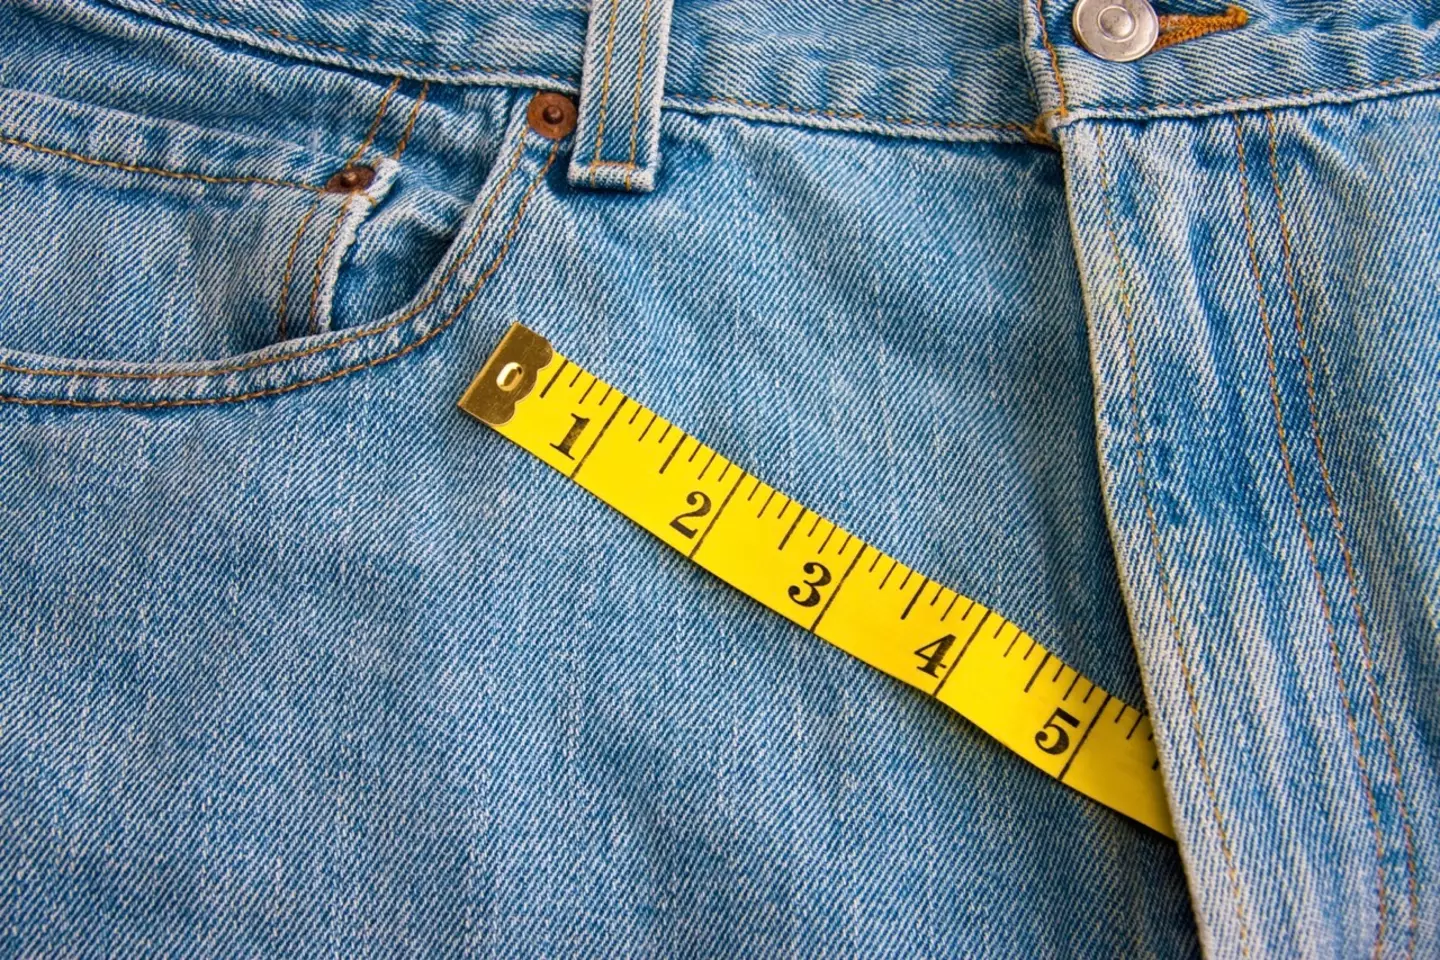 Researchers who have studied the average change in penis length over the last 30 years are 'concerned' by their findings. (Getty Stock Images)